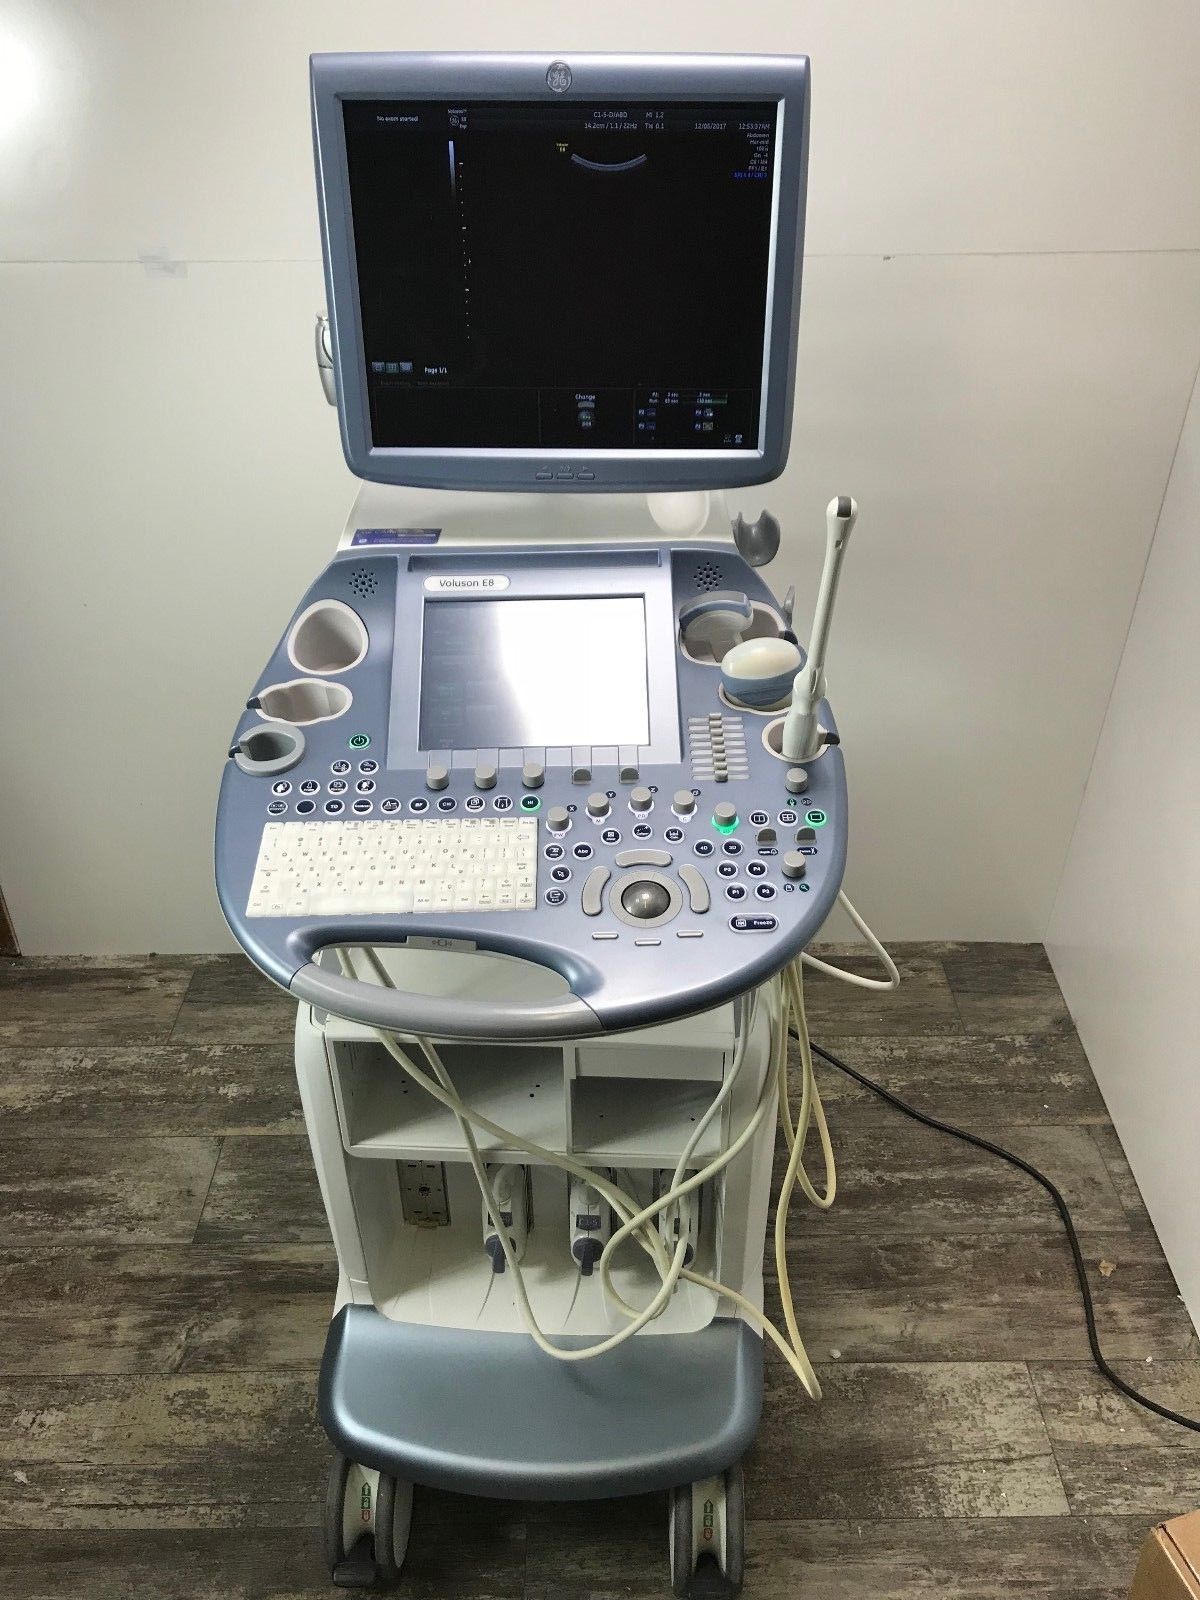 GE VOLUSON E8 BT13 HD LIVE ULTRASOUND WITH RM6C, C1-5D, IC5-9D PROBES DIAGNOSTIC ULTRASOUND MACHINES FOR SALE